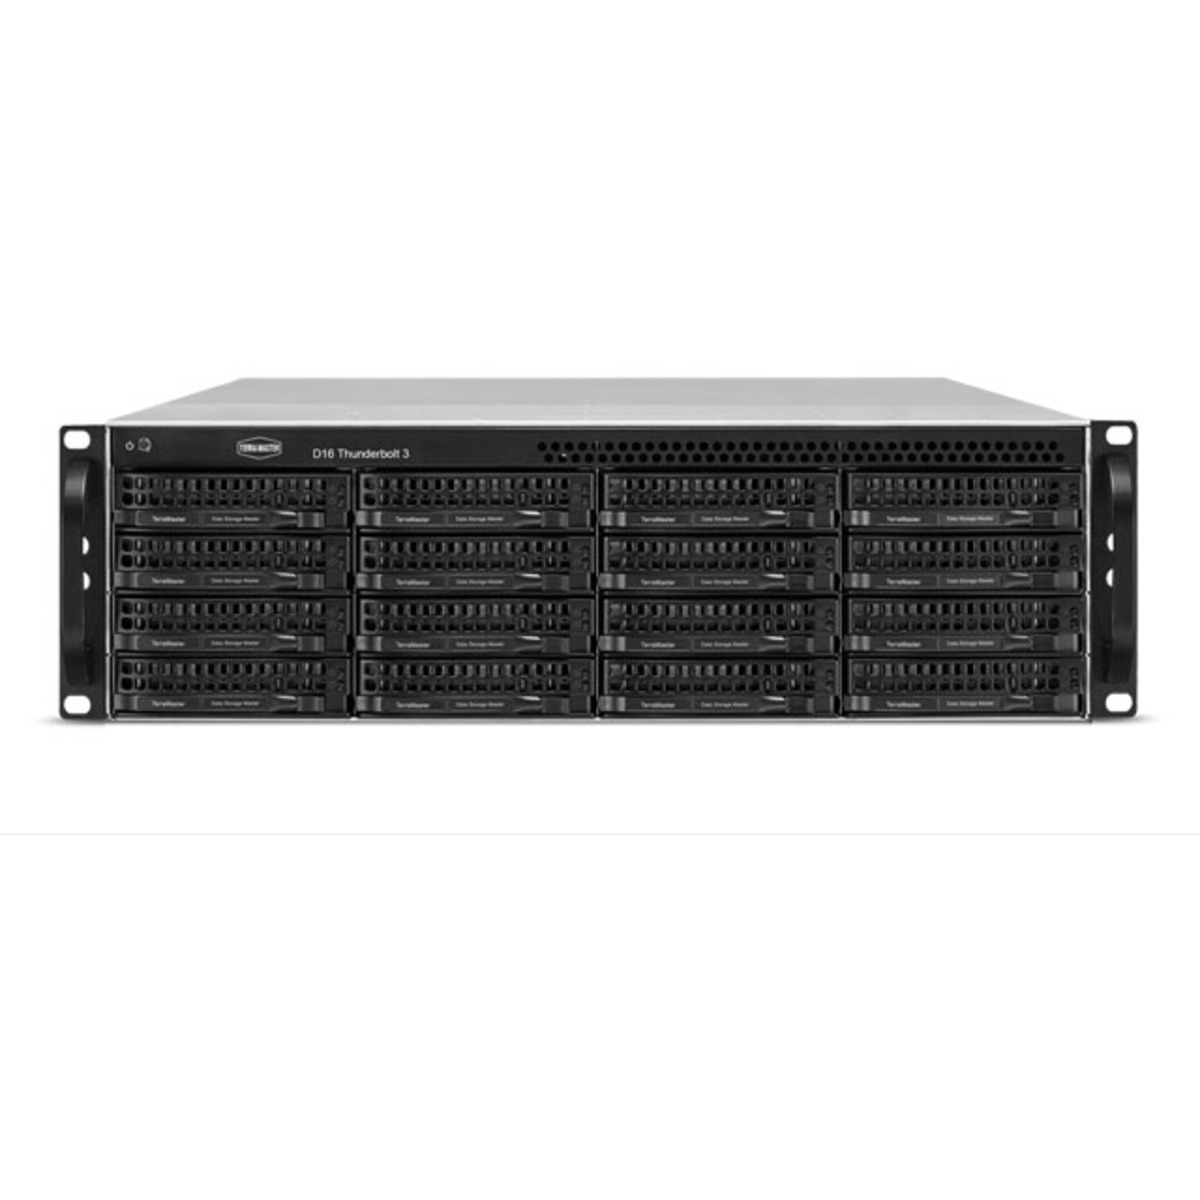 TerraMaster D16 Thunderbolt 3 308tb 16-Bay RackMount Multimedia / Power User / Business DAS - Direct Attached Storage Device 14x22tb Western Digital Ultrastar HC570 WUH722222ALE6L4 3.5 7200rpm SATA 6Gb/s HDD ENTERPRISE Class Drives Installed - Burn-In Tested D16 Thunderbolt 3